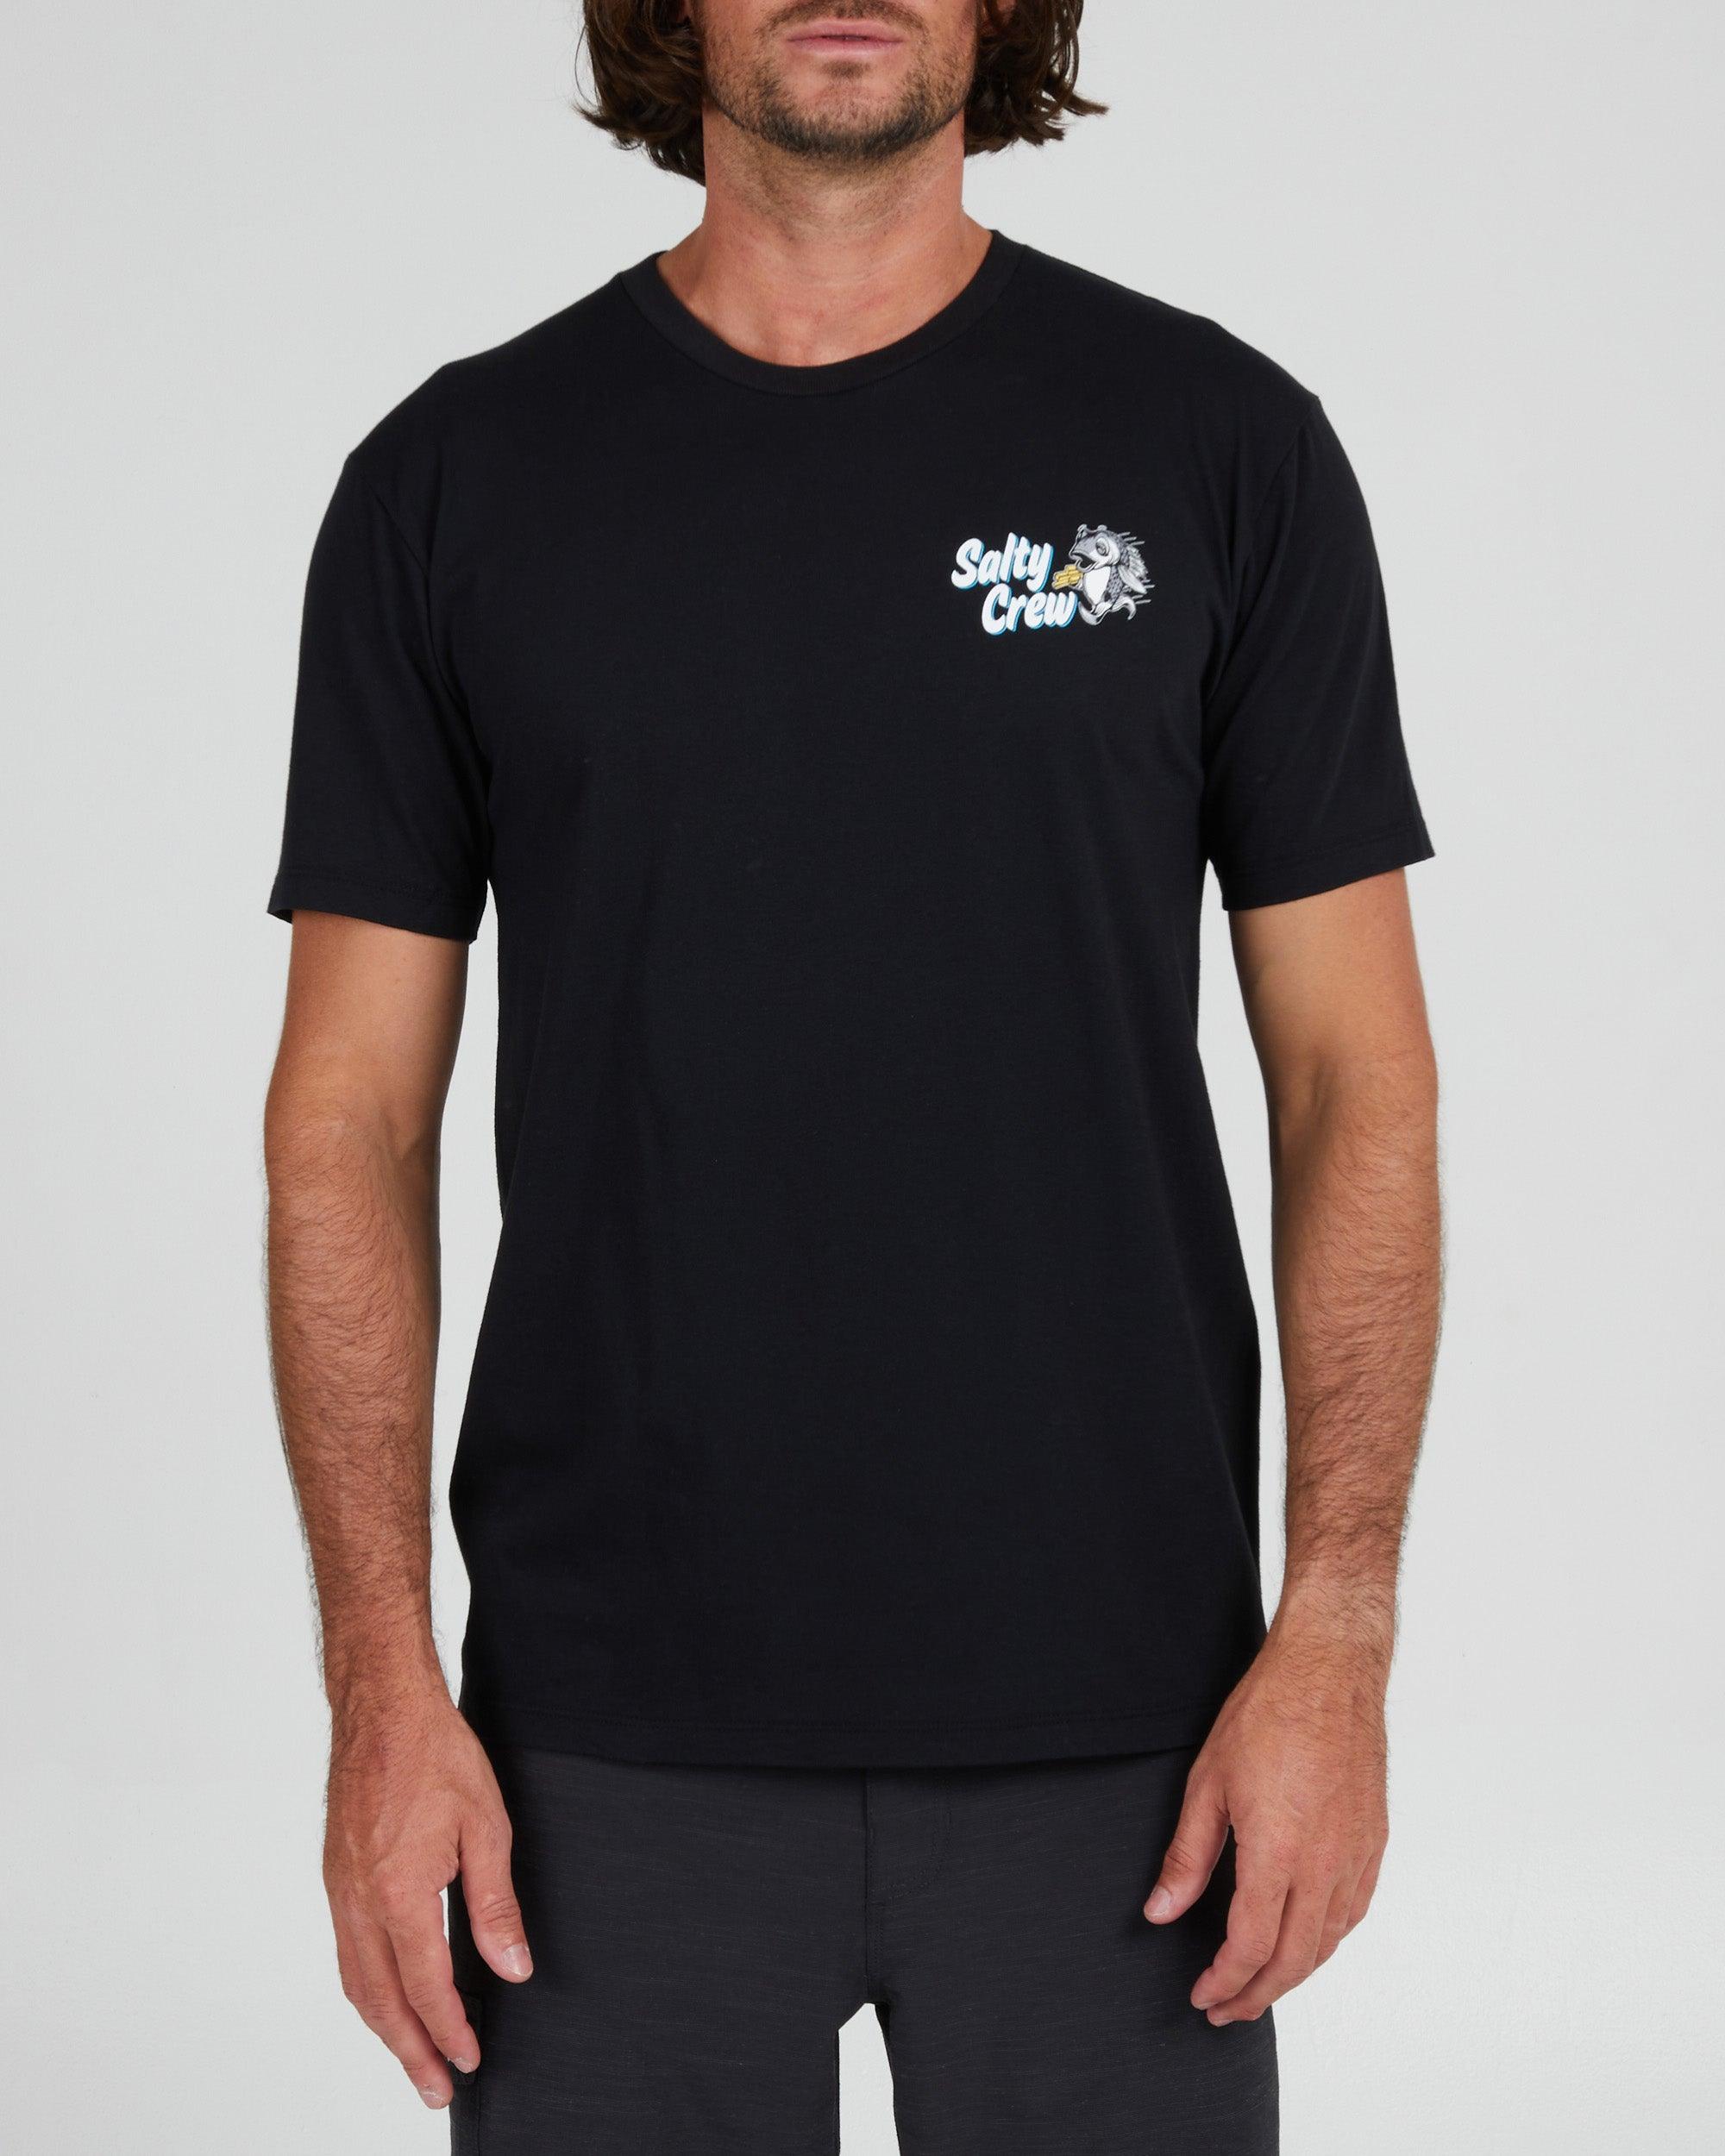 Fish & Chips S/S Premium Tee - Black - Purpose-Built / Home of the Trades